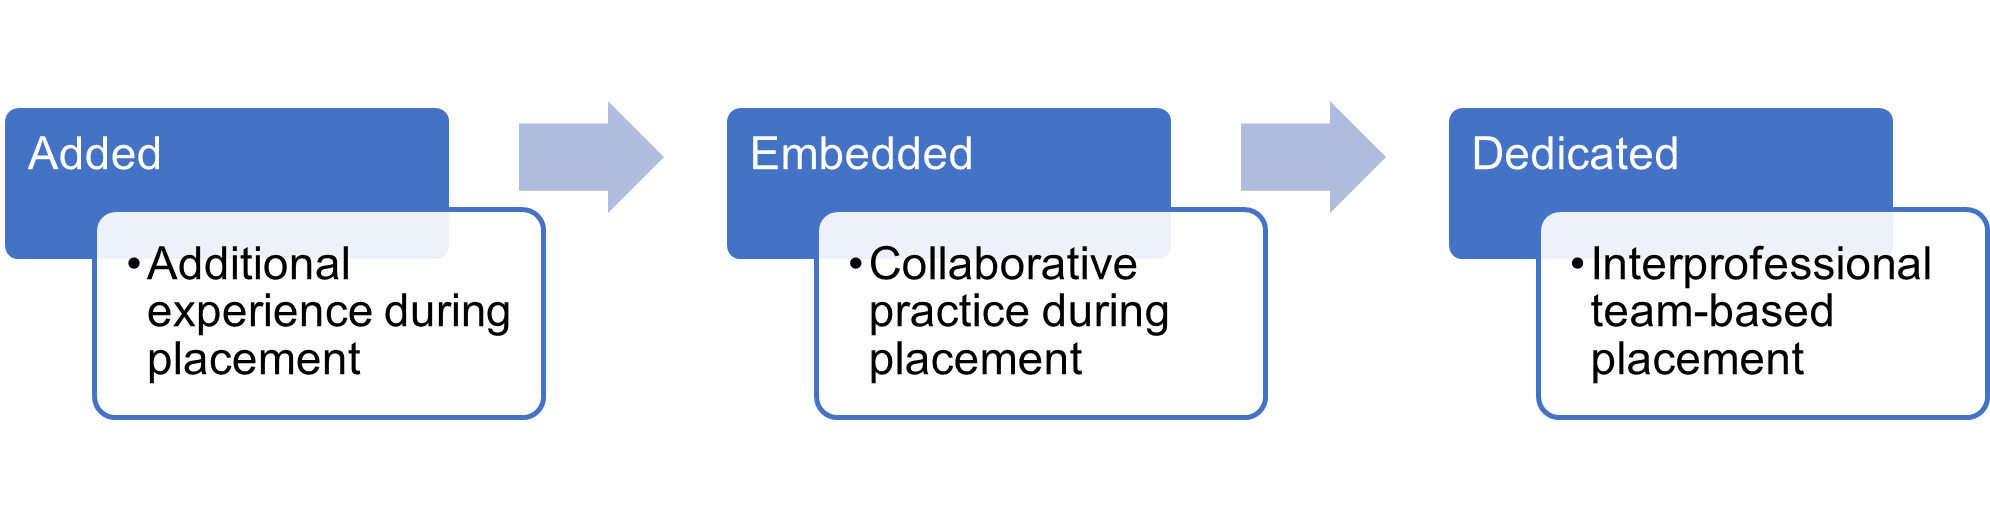 IPE continuum from added, to embedded and dedicated